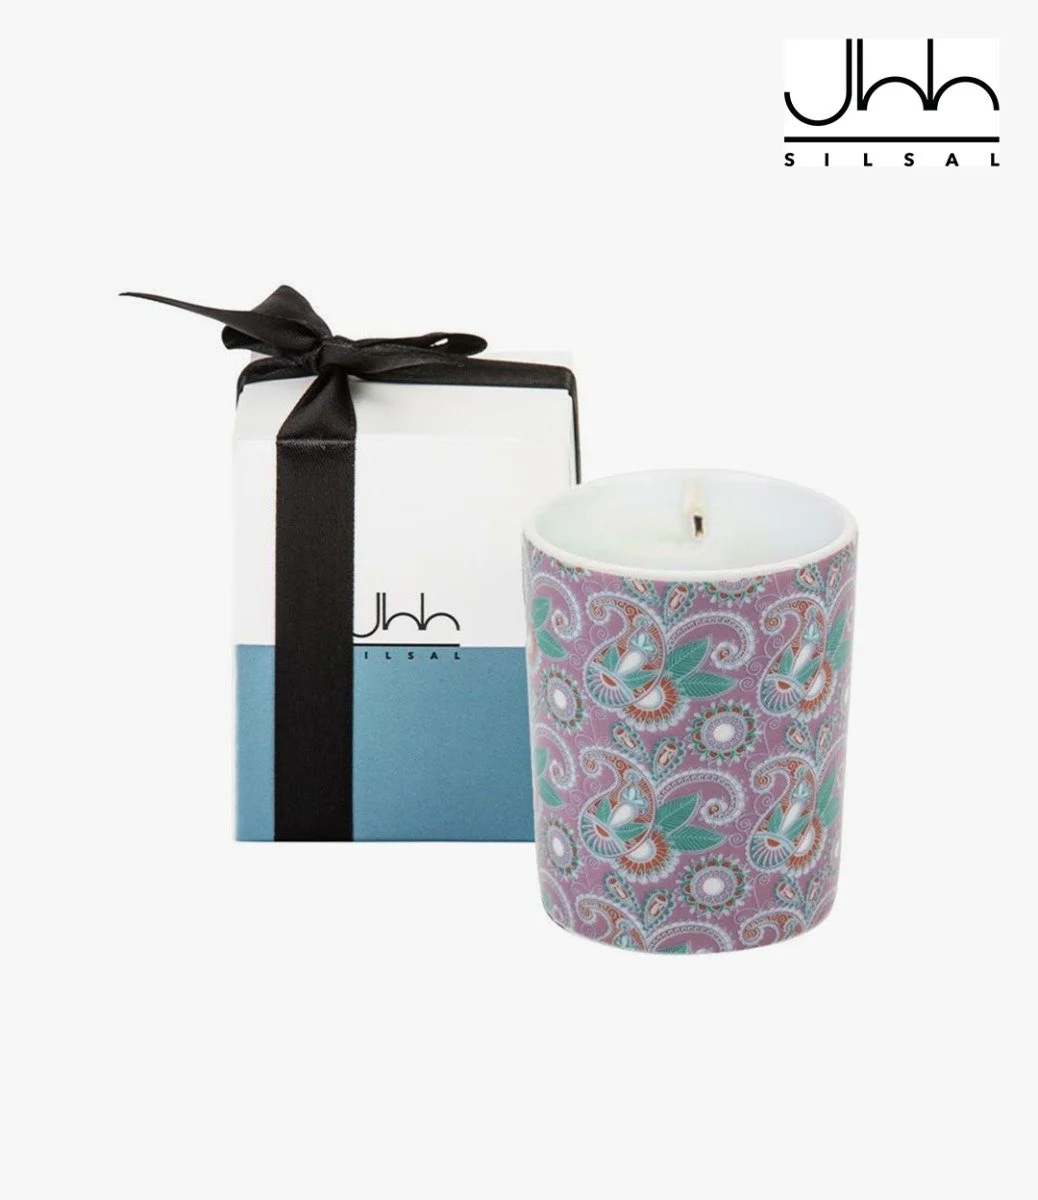 The Mumbai Candle - 60g By Silsal